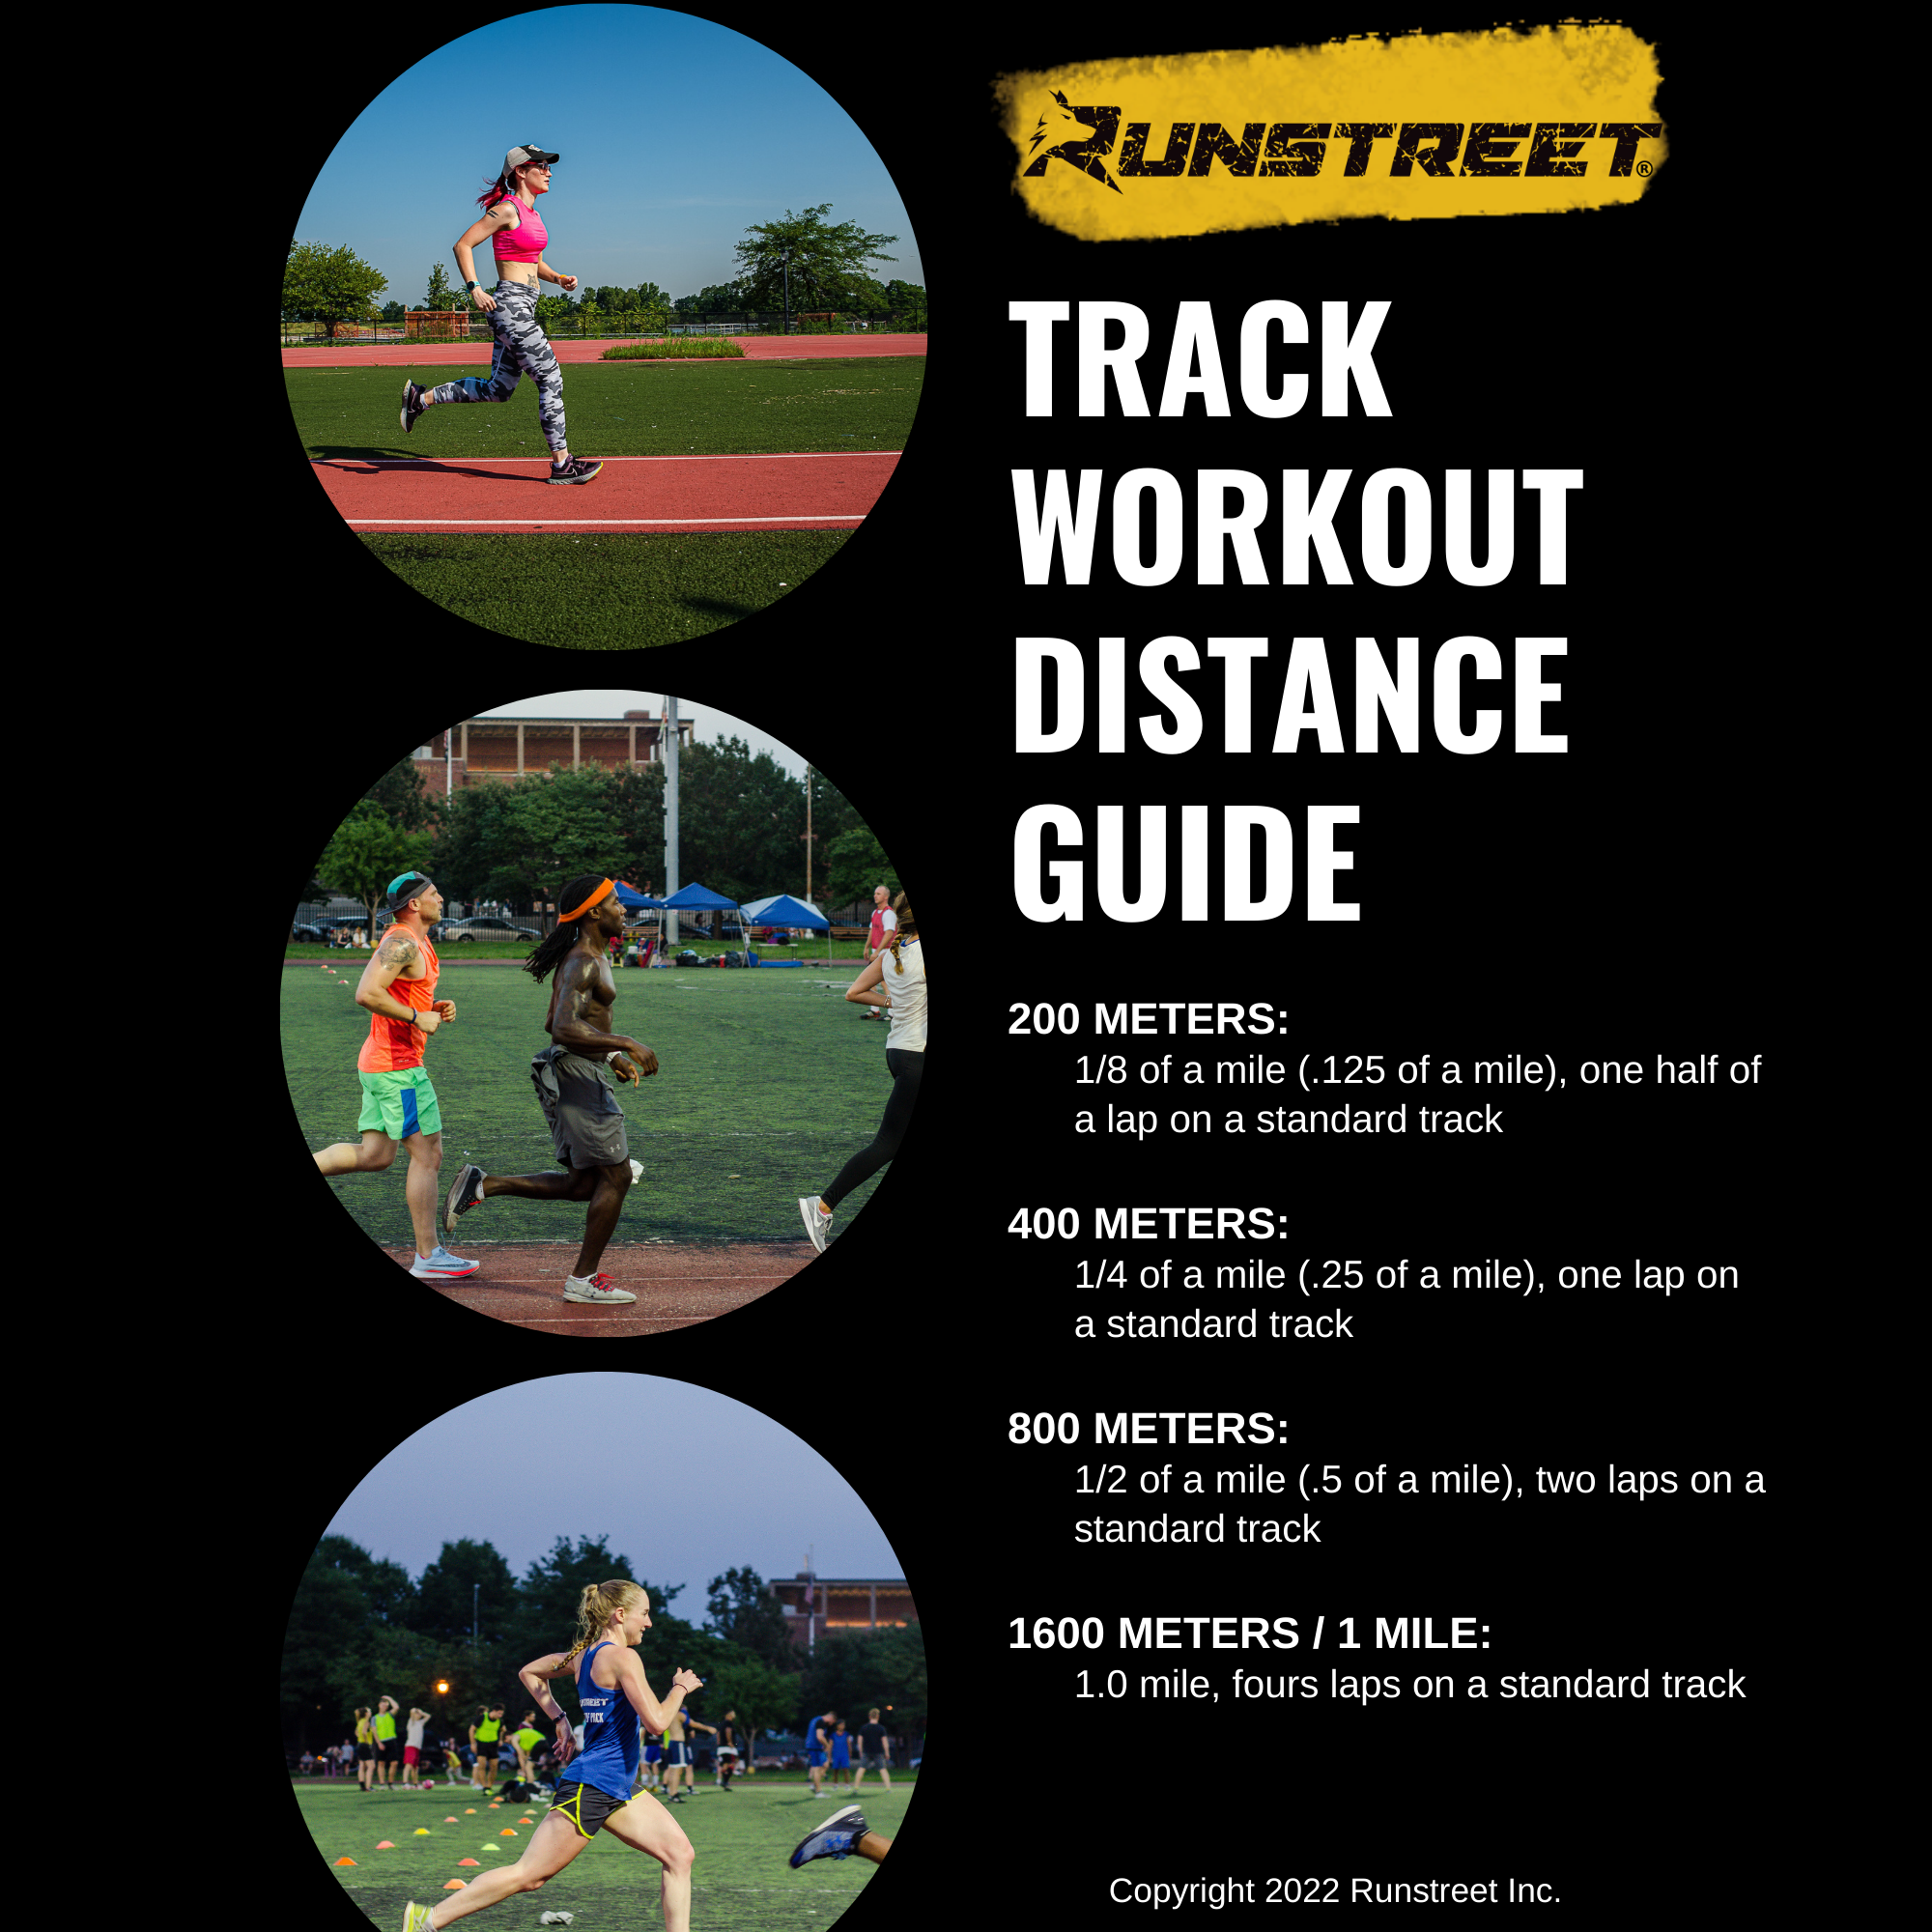 Speed Training For Athletes: Tips, Drills & Workout Plan